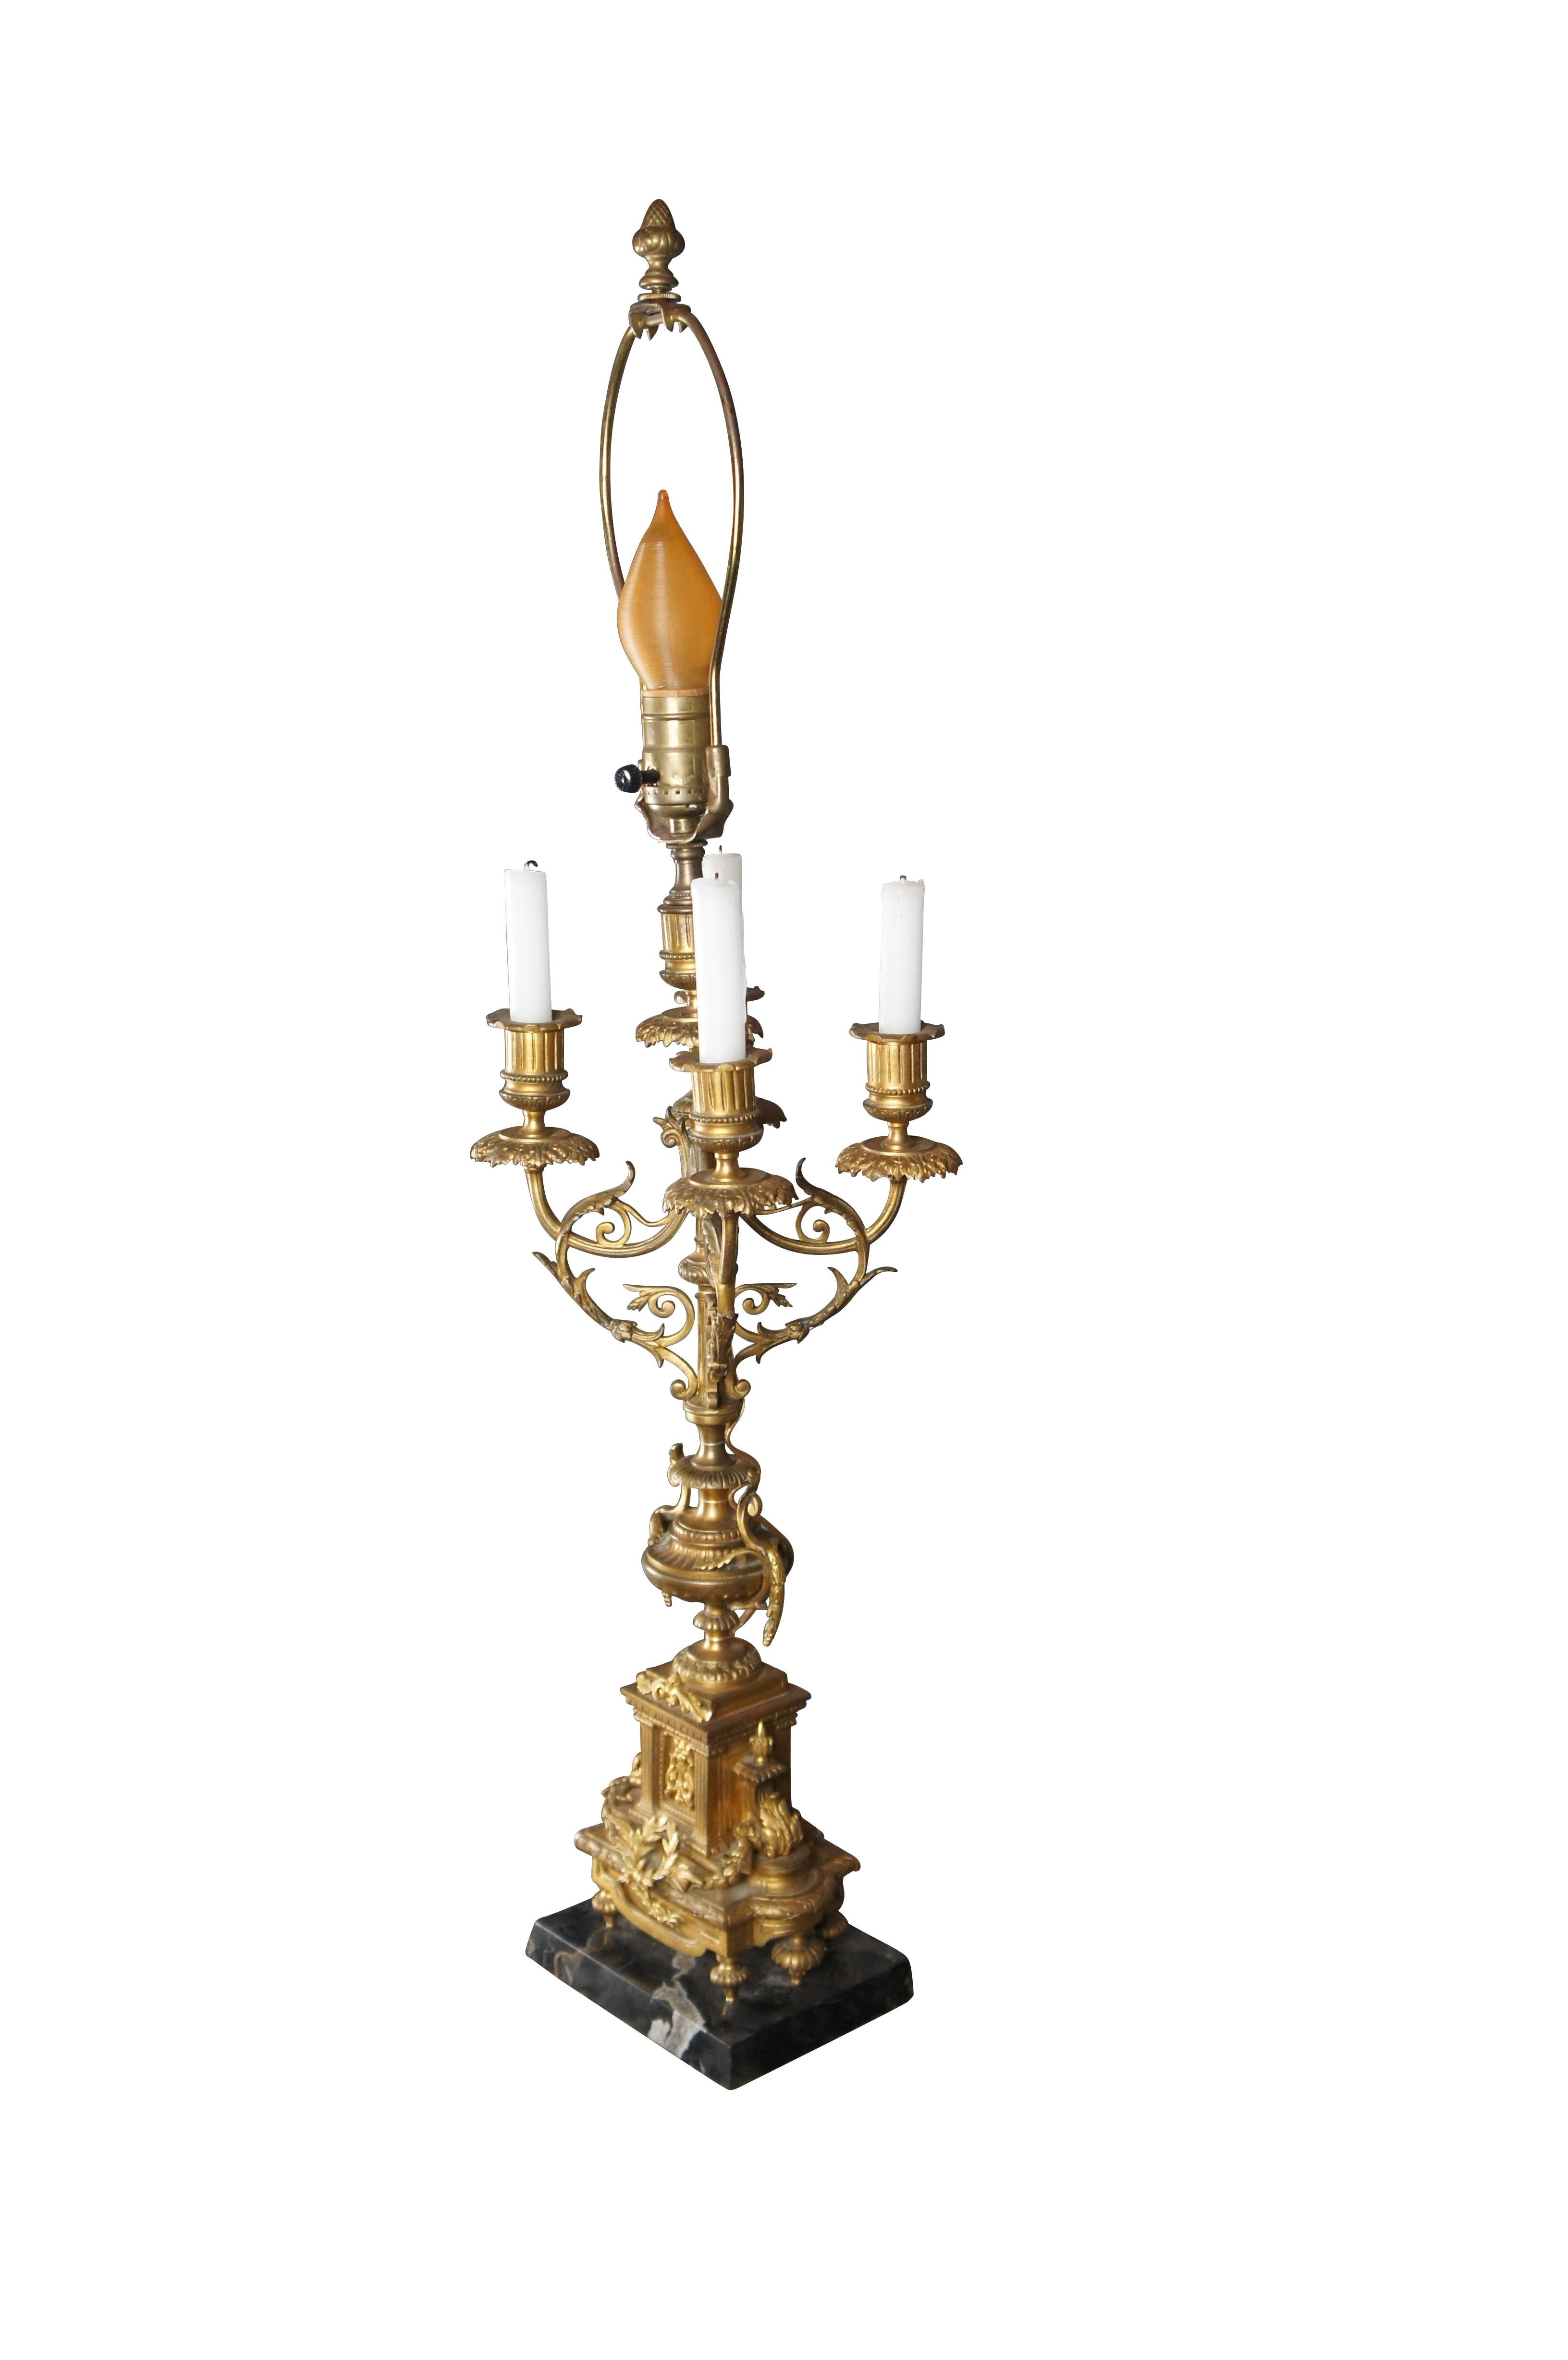 Antique French Louis XVI Gilt Brass Converted 4 Arm Candelabra Table Lamp Light In Good Condition For Sale In Dayton, OH